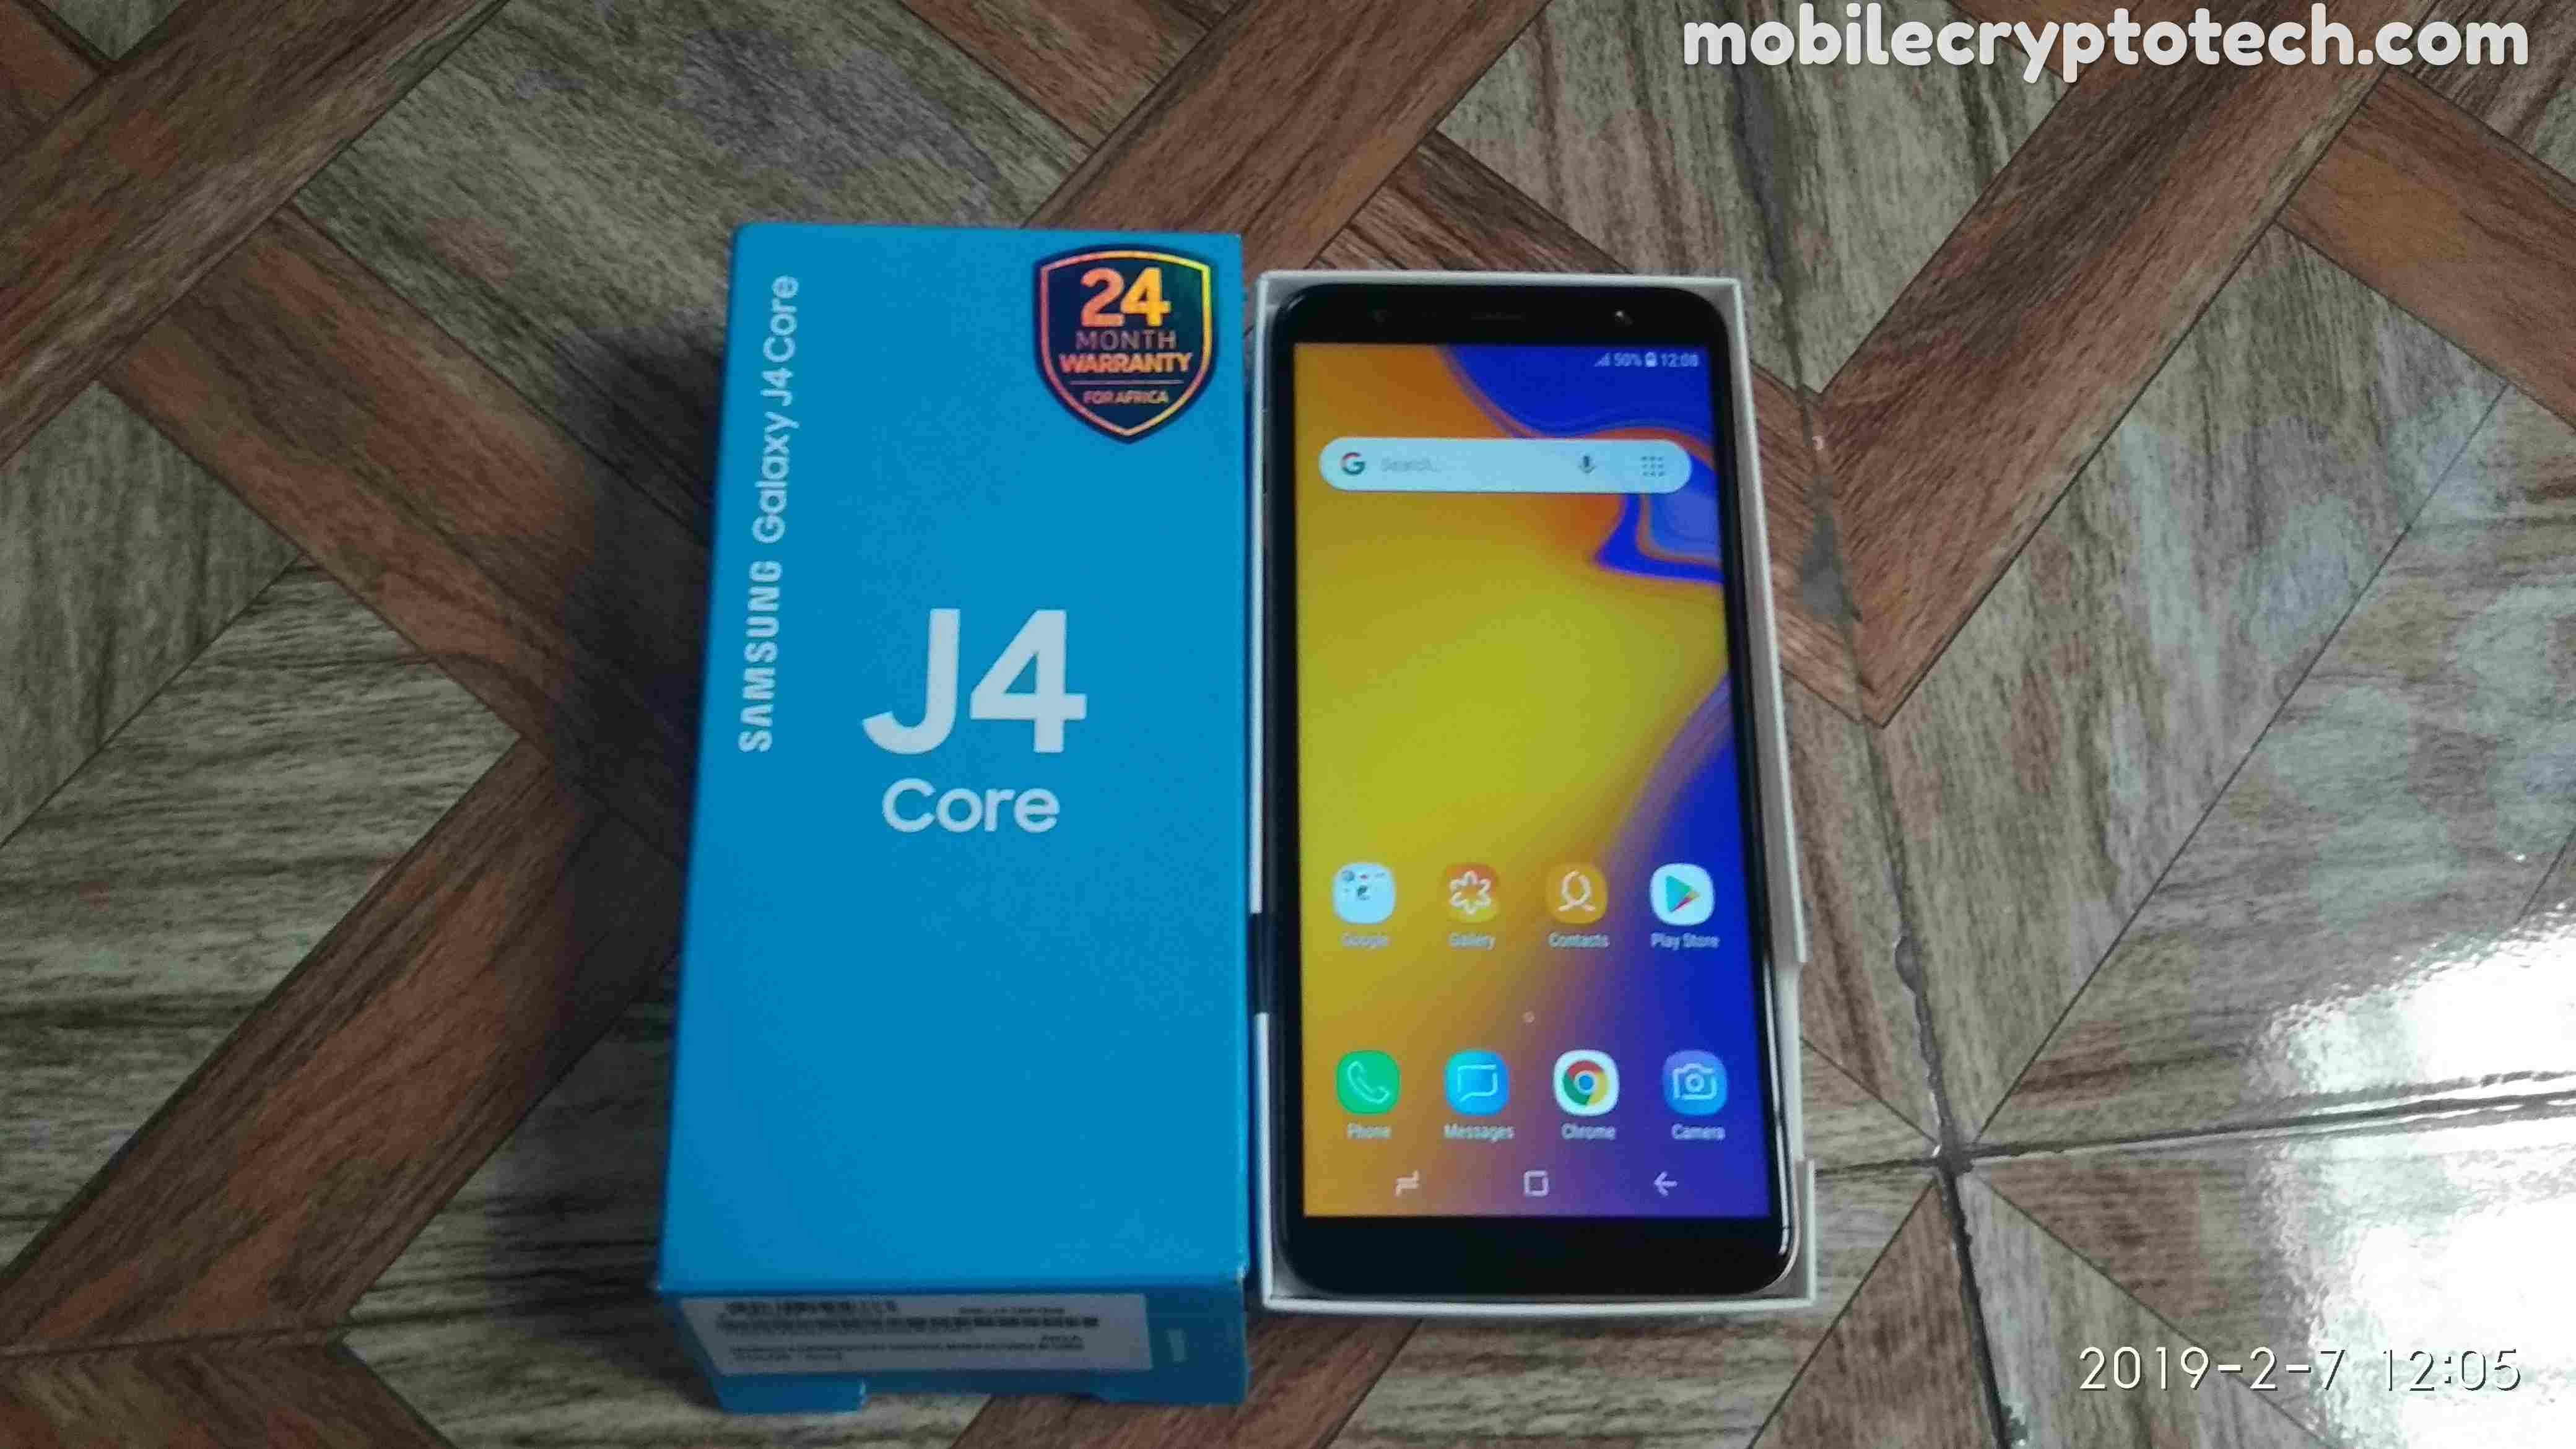 MCT Video: Samsung Galaxy J4 Core Unboxing & First Look